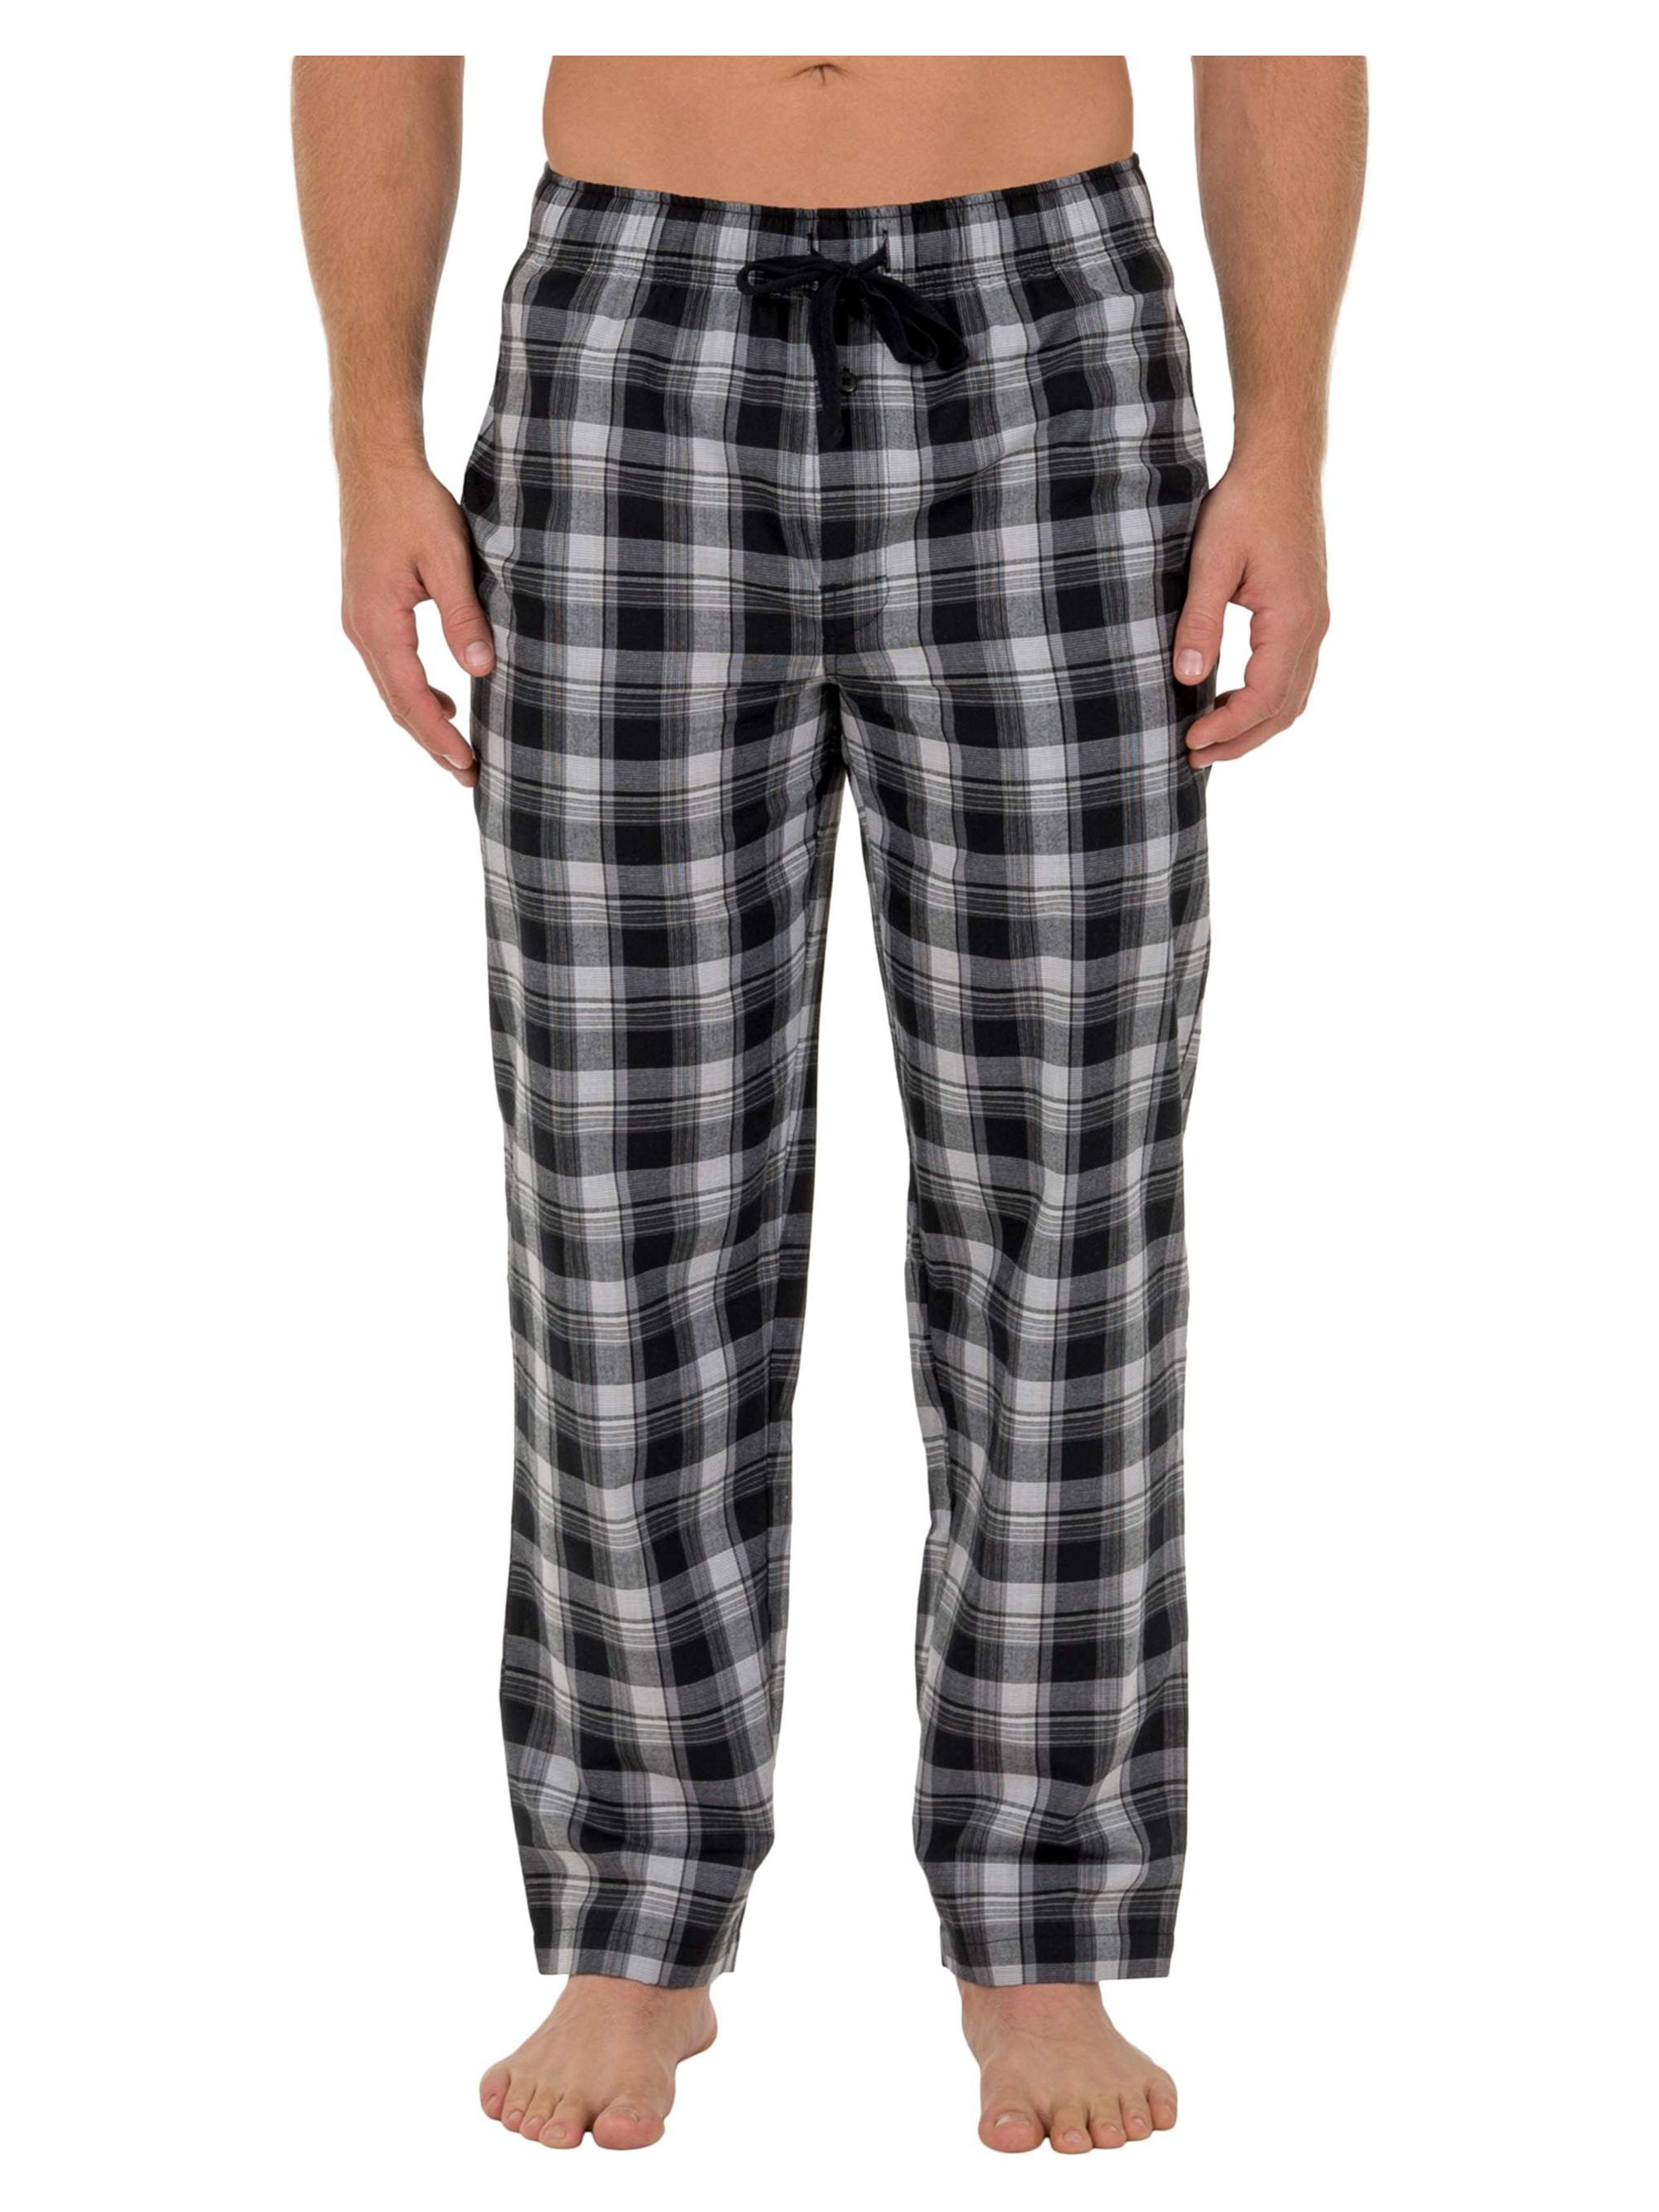 Fruit of the Loom Men's and Big Men's Microsanded Woven Plaid Pajama Pants, Sizes S-6XL & LT-3XLT - image 1 of 6